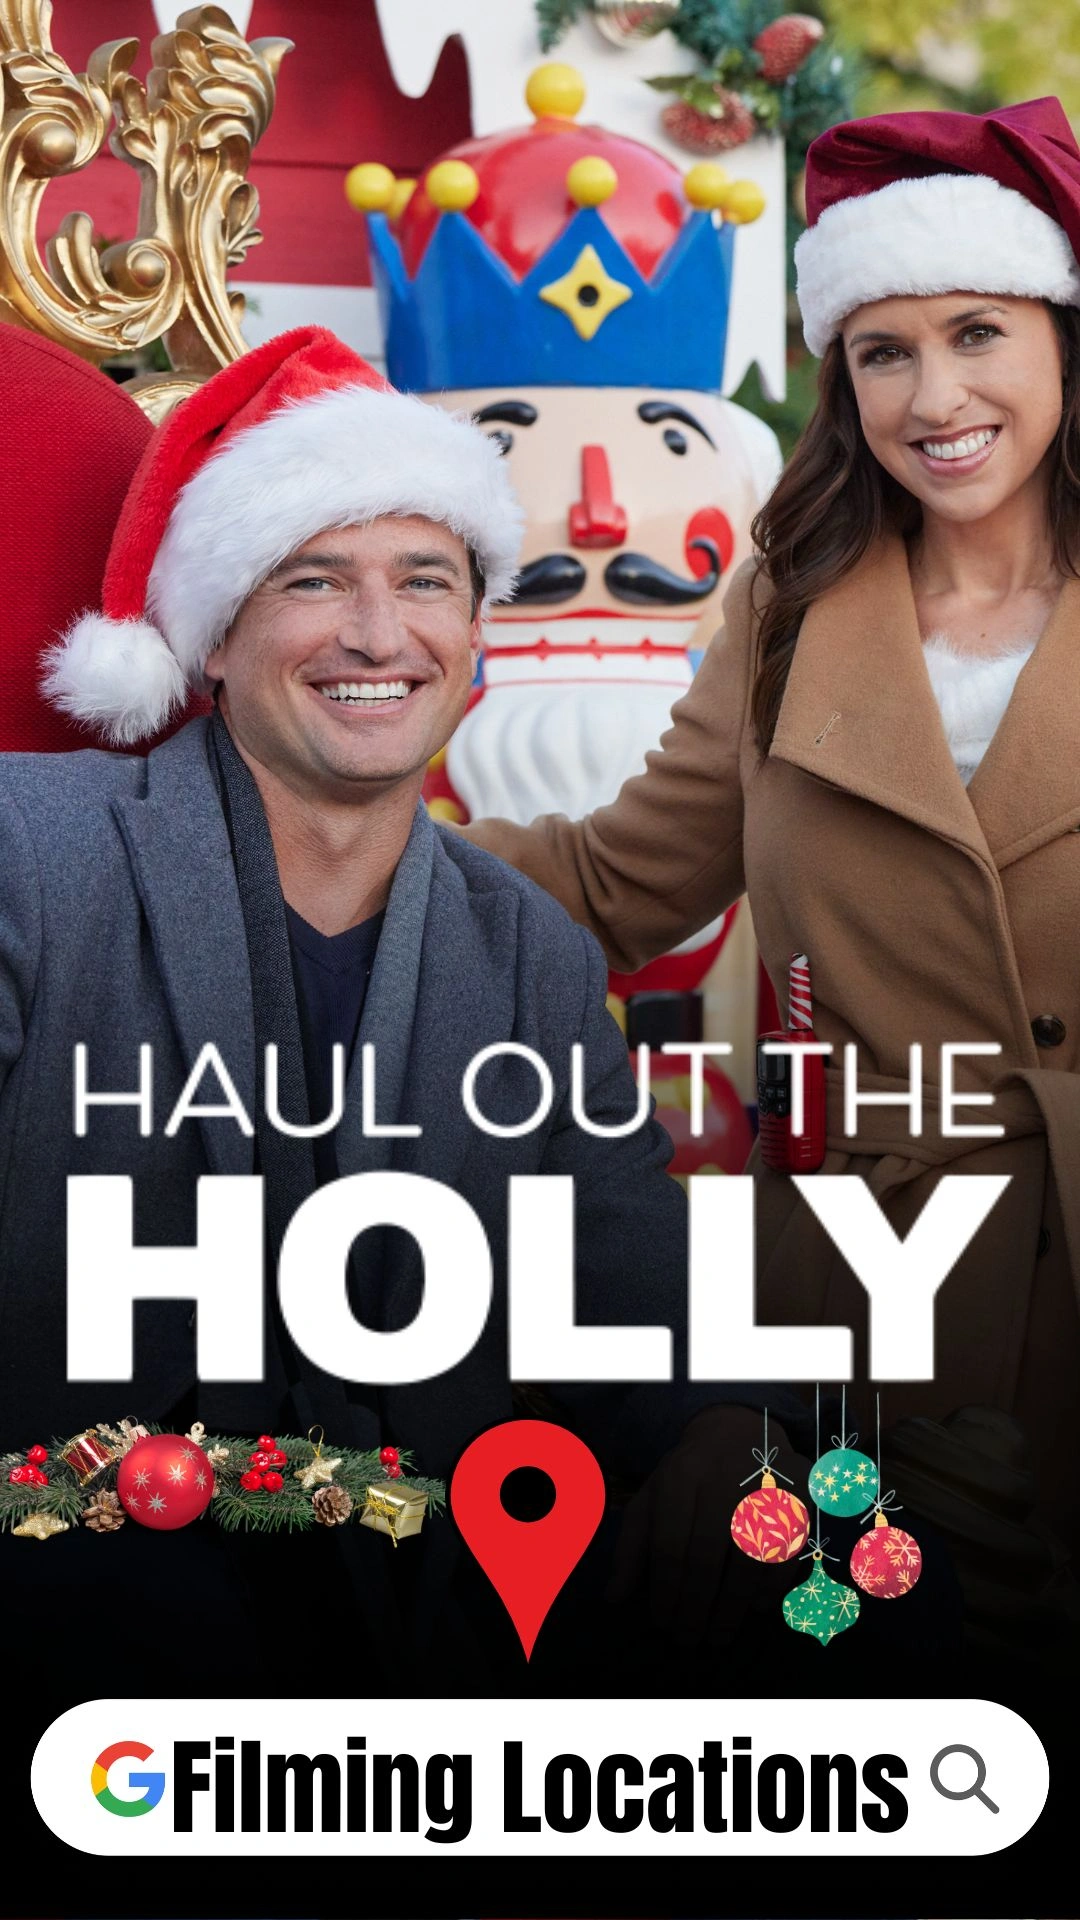 Haul out the Holly Filming Locations